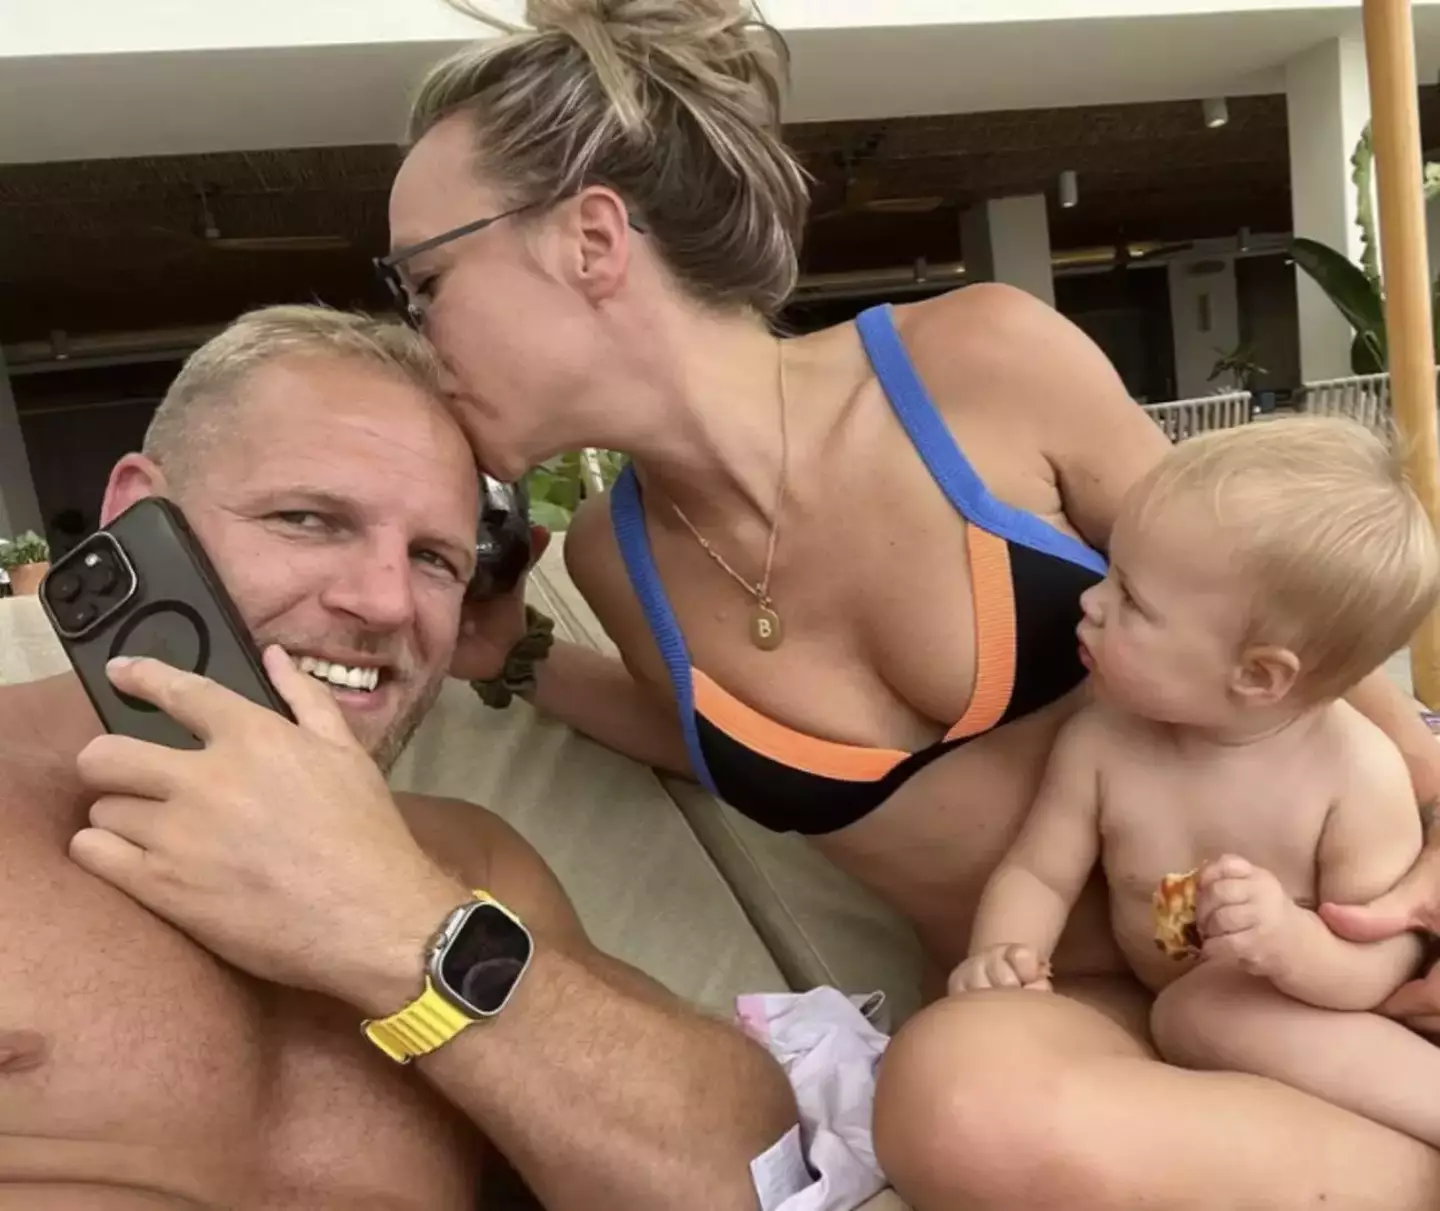 Chloe Madeley and James Haskell share a child together and have agreed to co-parent her following their separation.